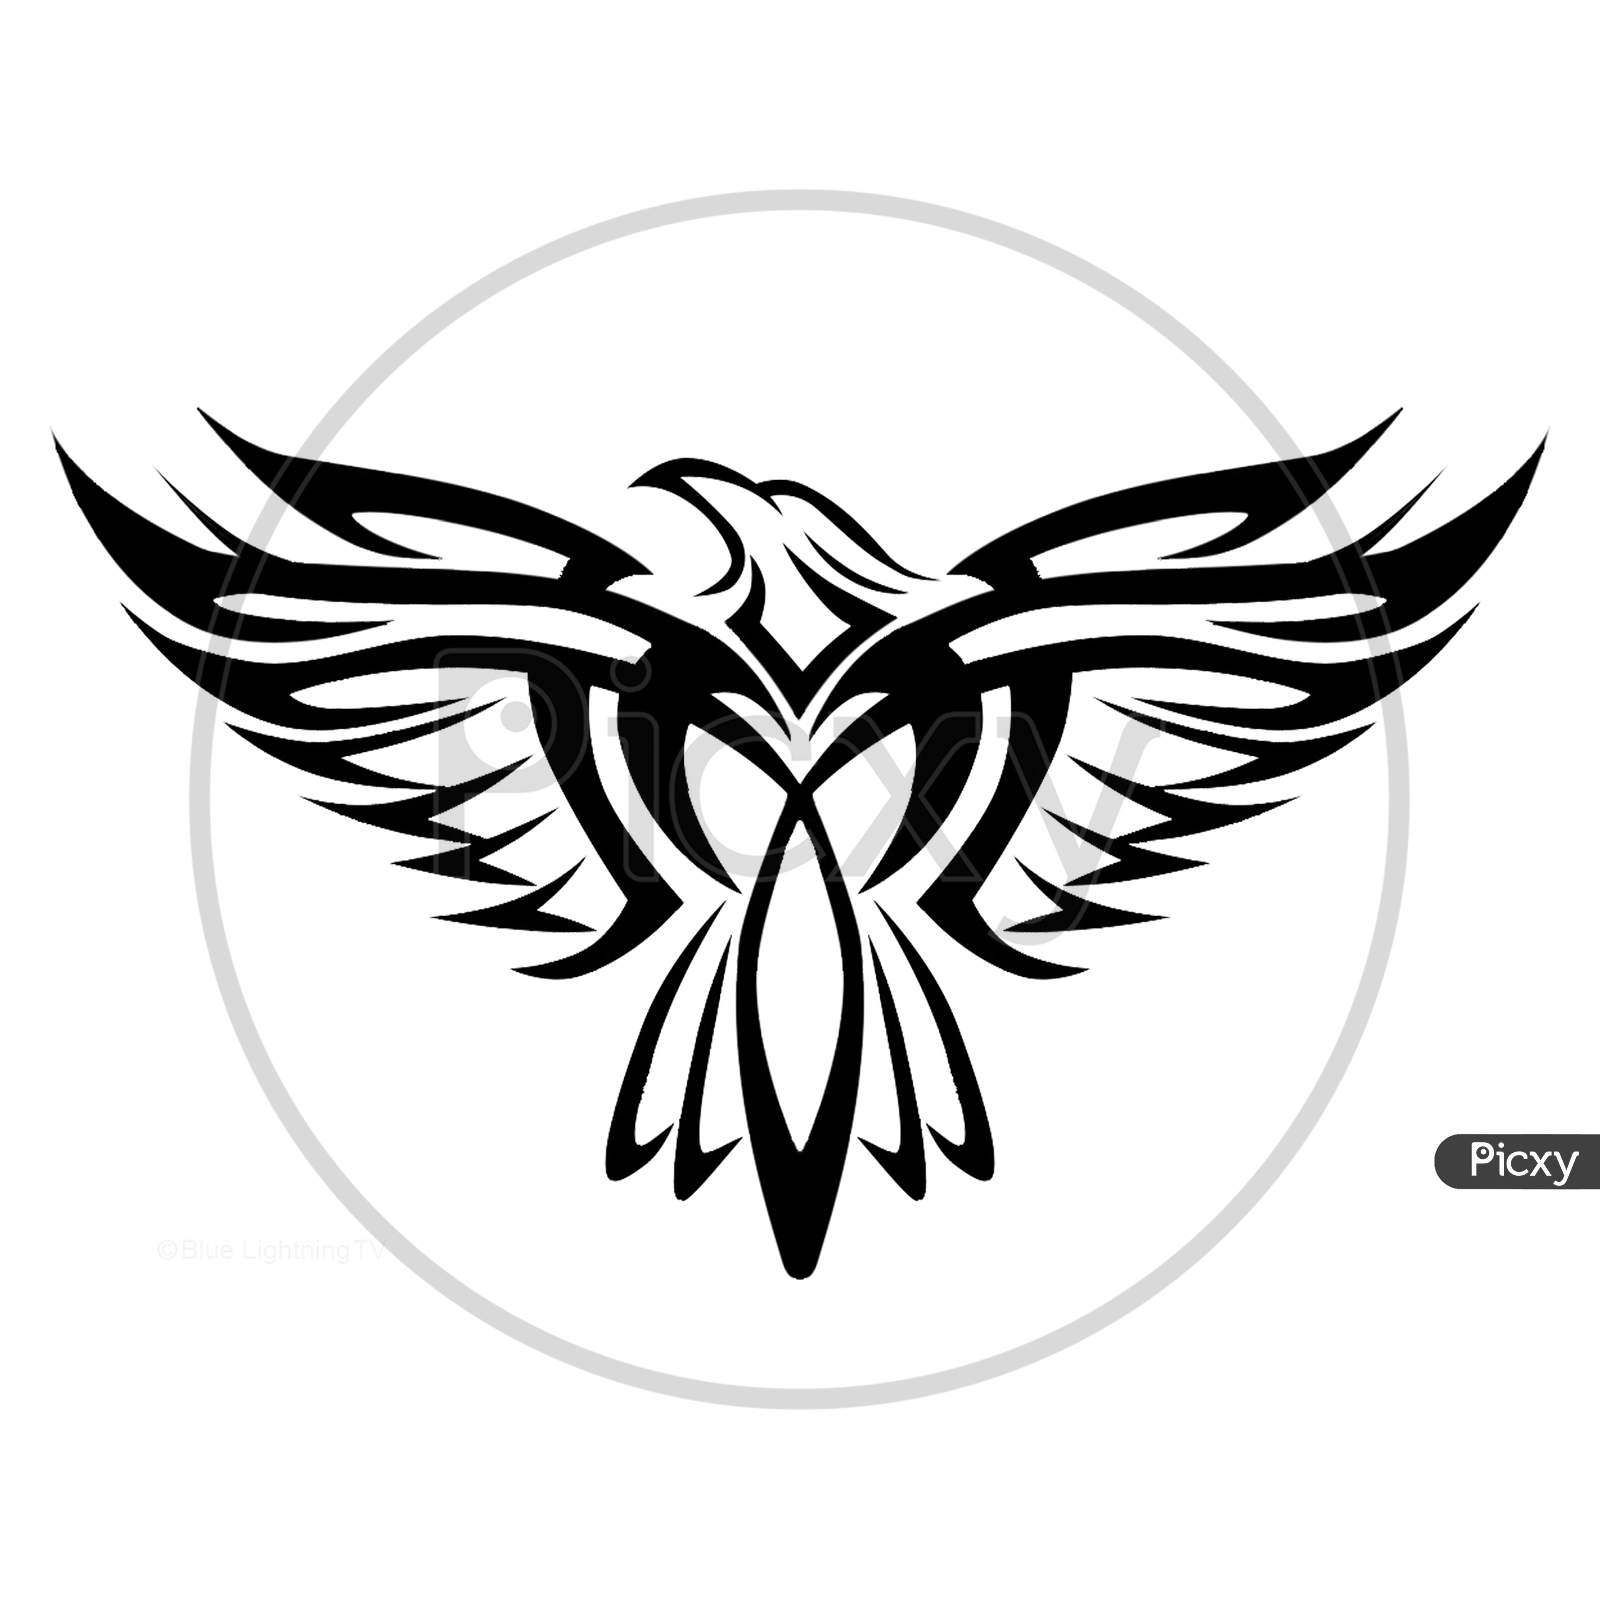 10927 Eagle Tattoo Tribal Images Stock Photos  Vectors  Shutterstock